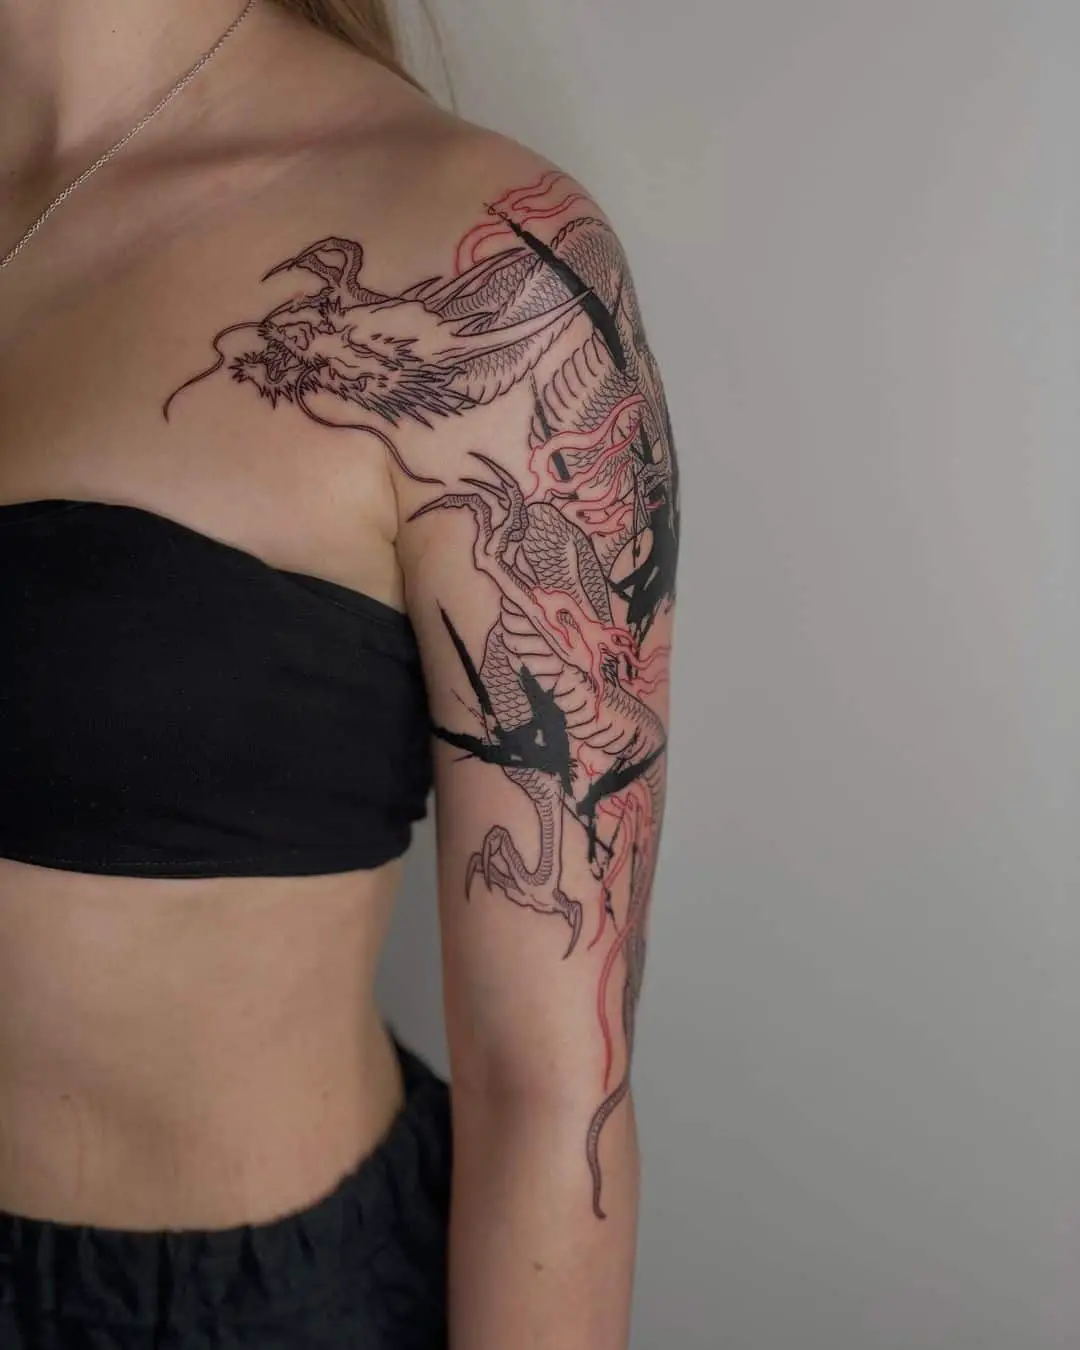 20+ Amazing Dragon Tattoo Ideas For Men And Women